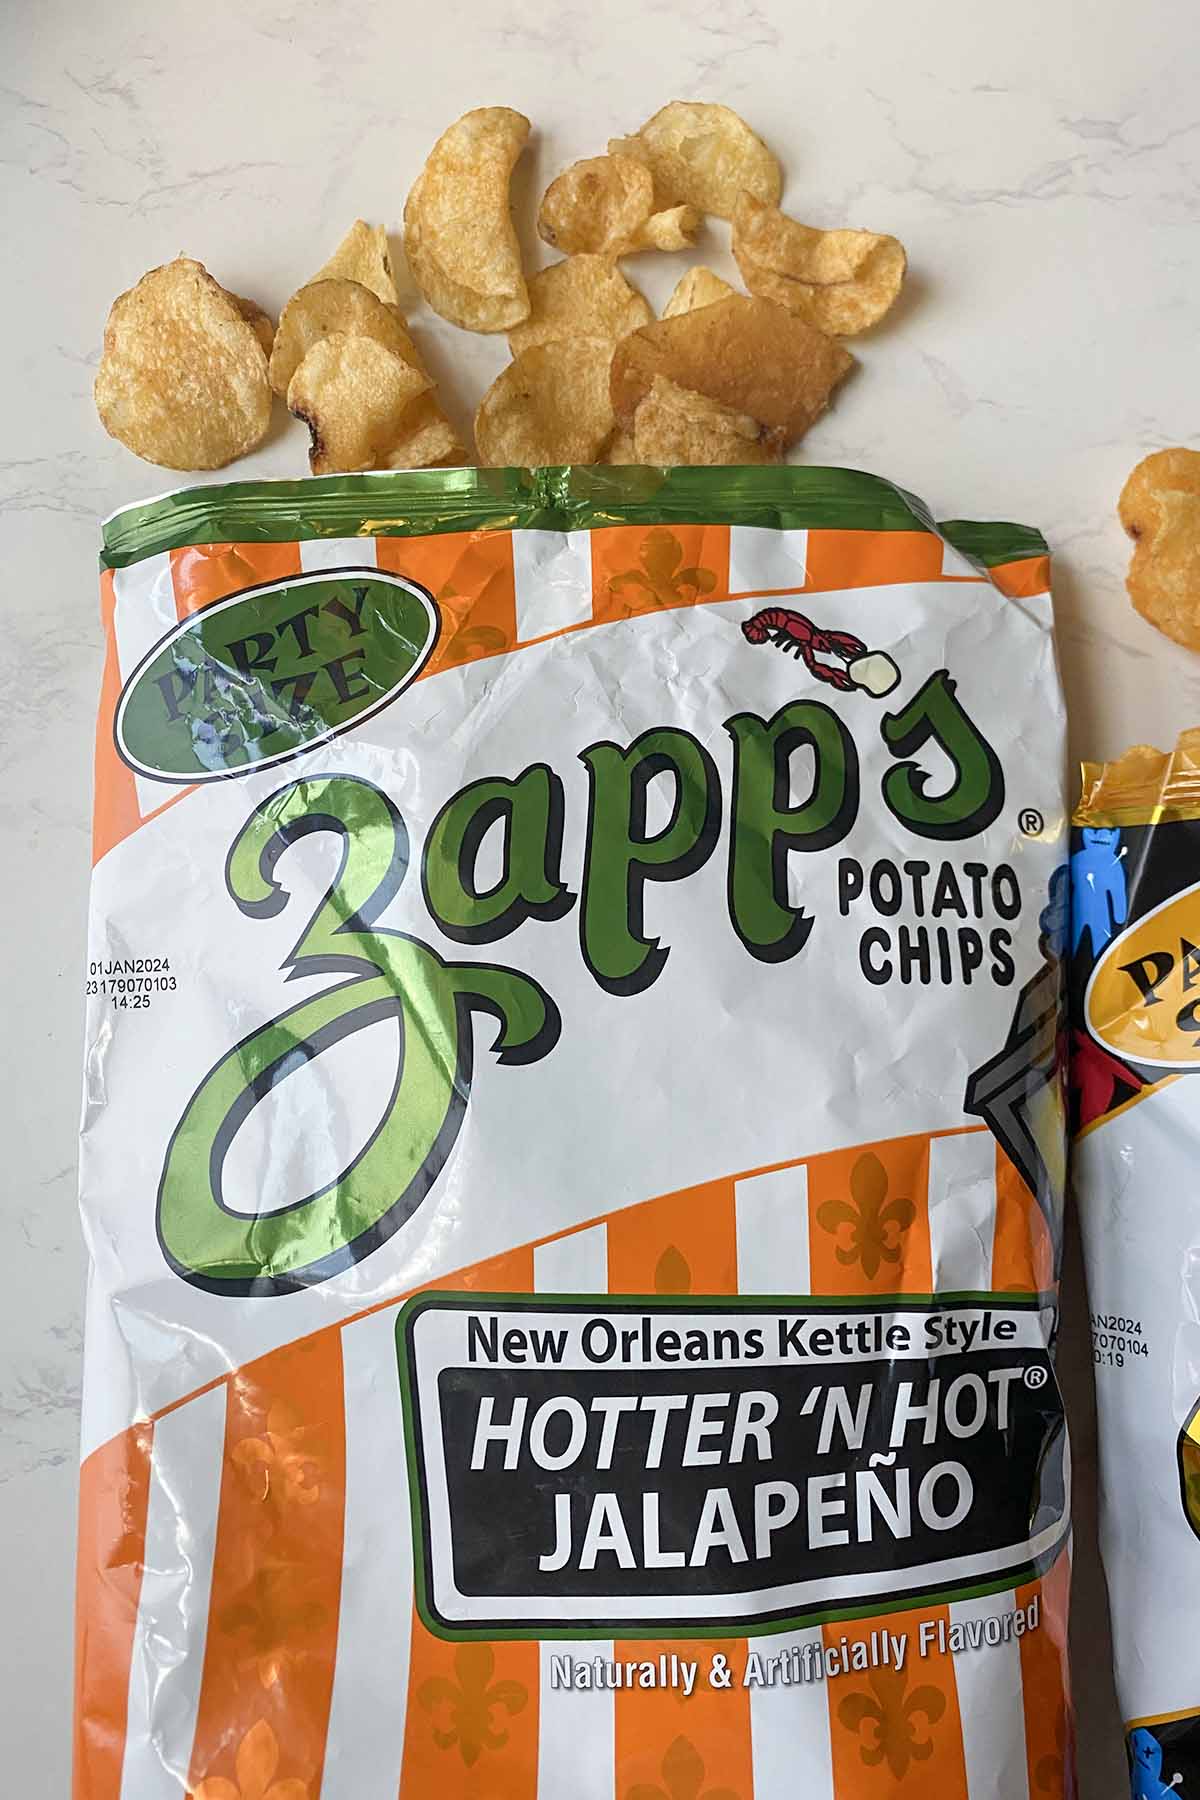 bag of Zapp's Hotter 'n' Hot Jalapeño chips with chips spilling out, so you can see what they look like